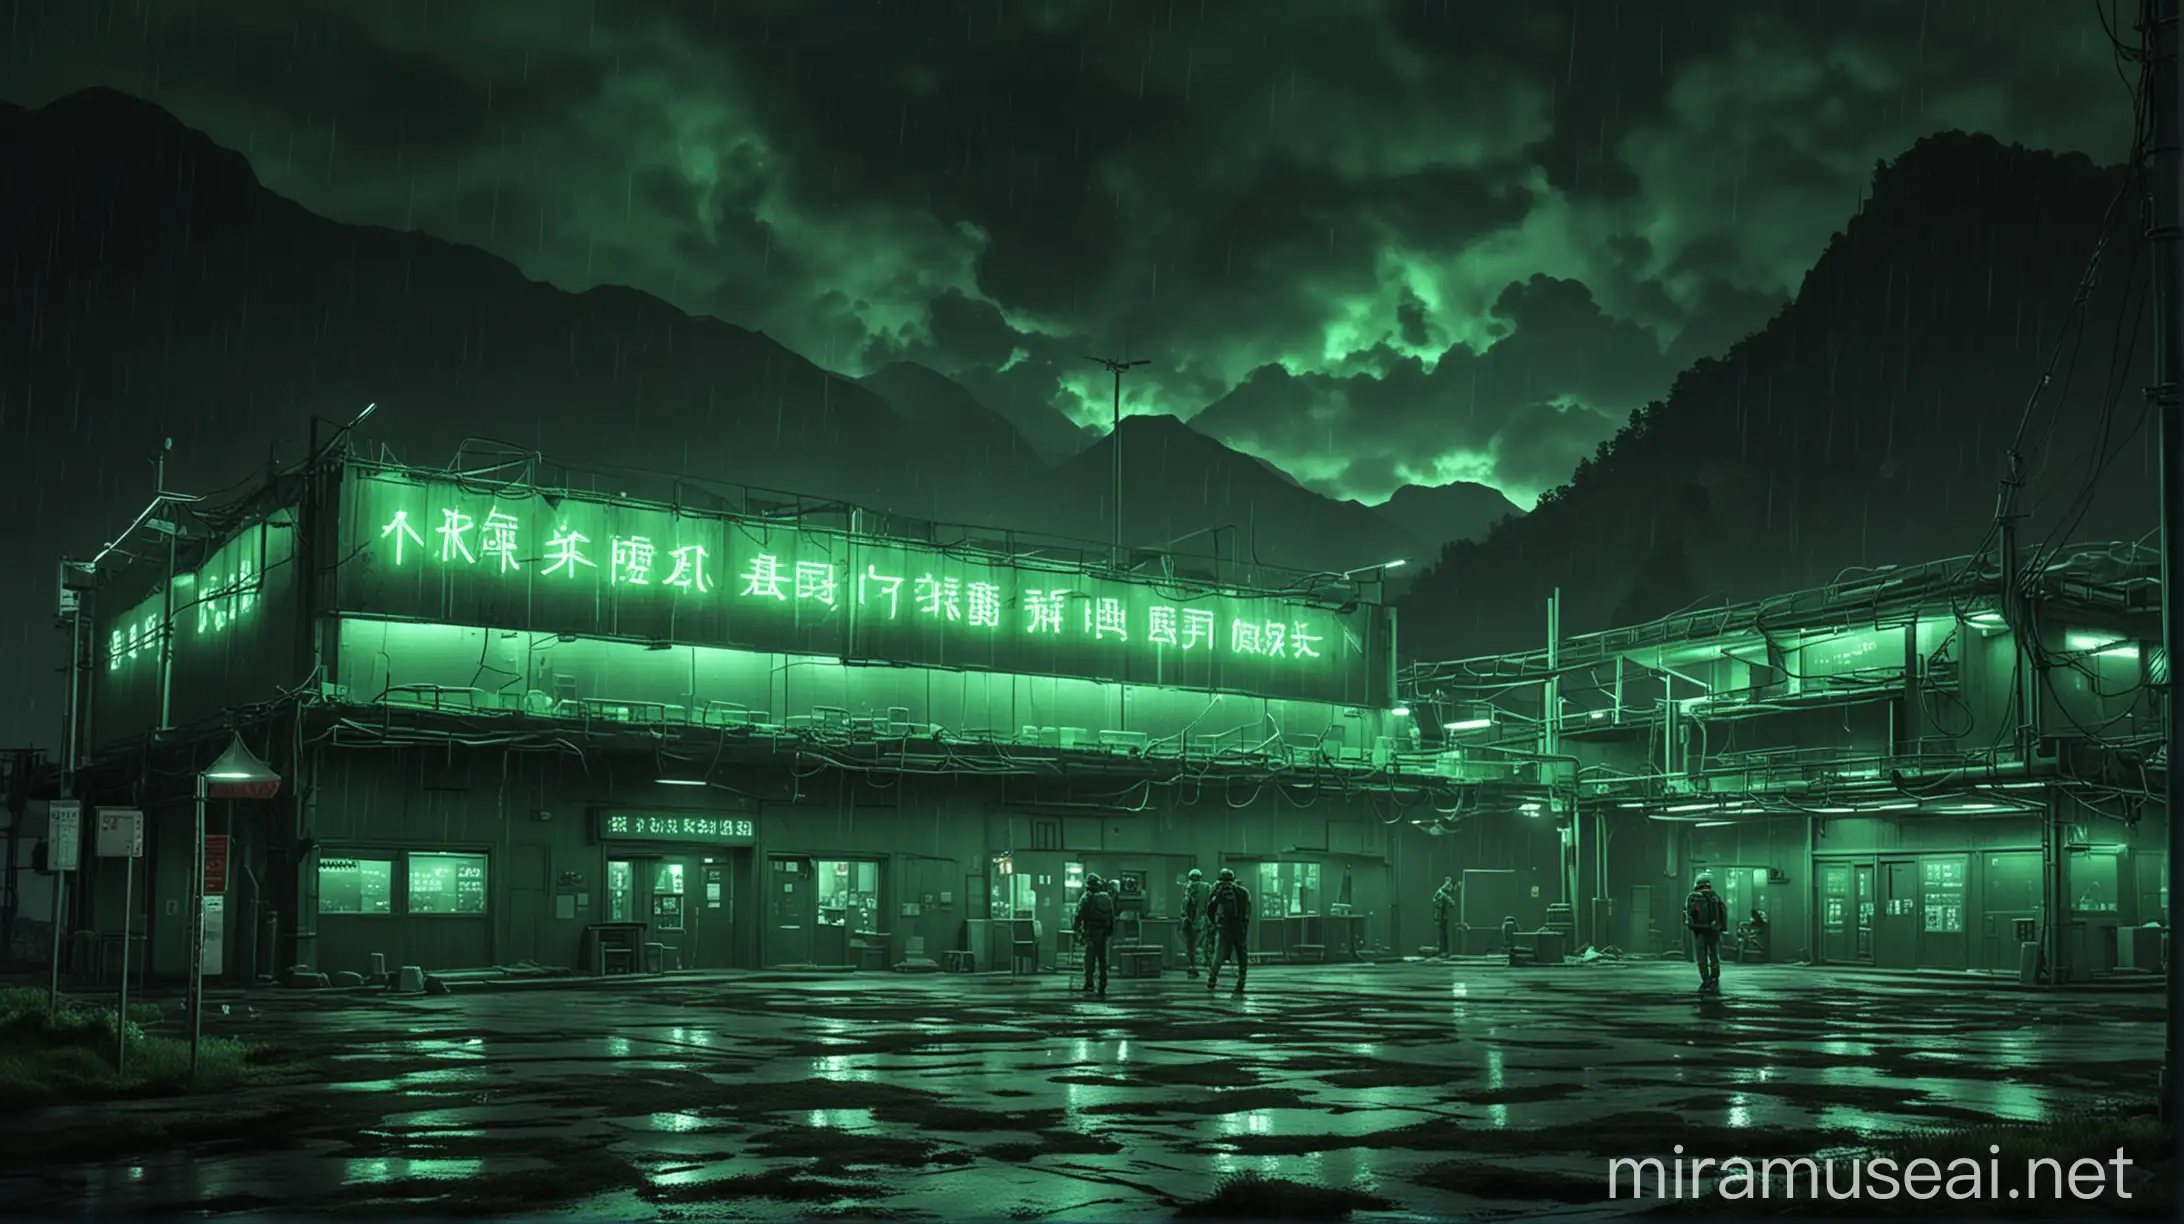 Realistic Research Center with Green Neon Lights and Atmospheric Environment